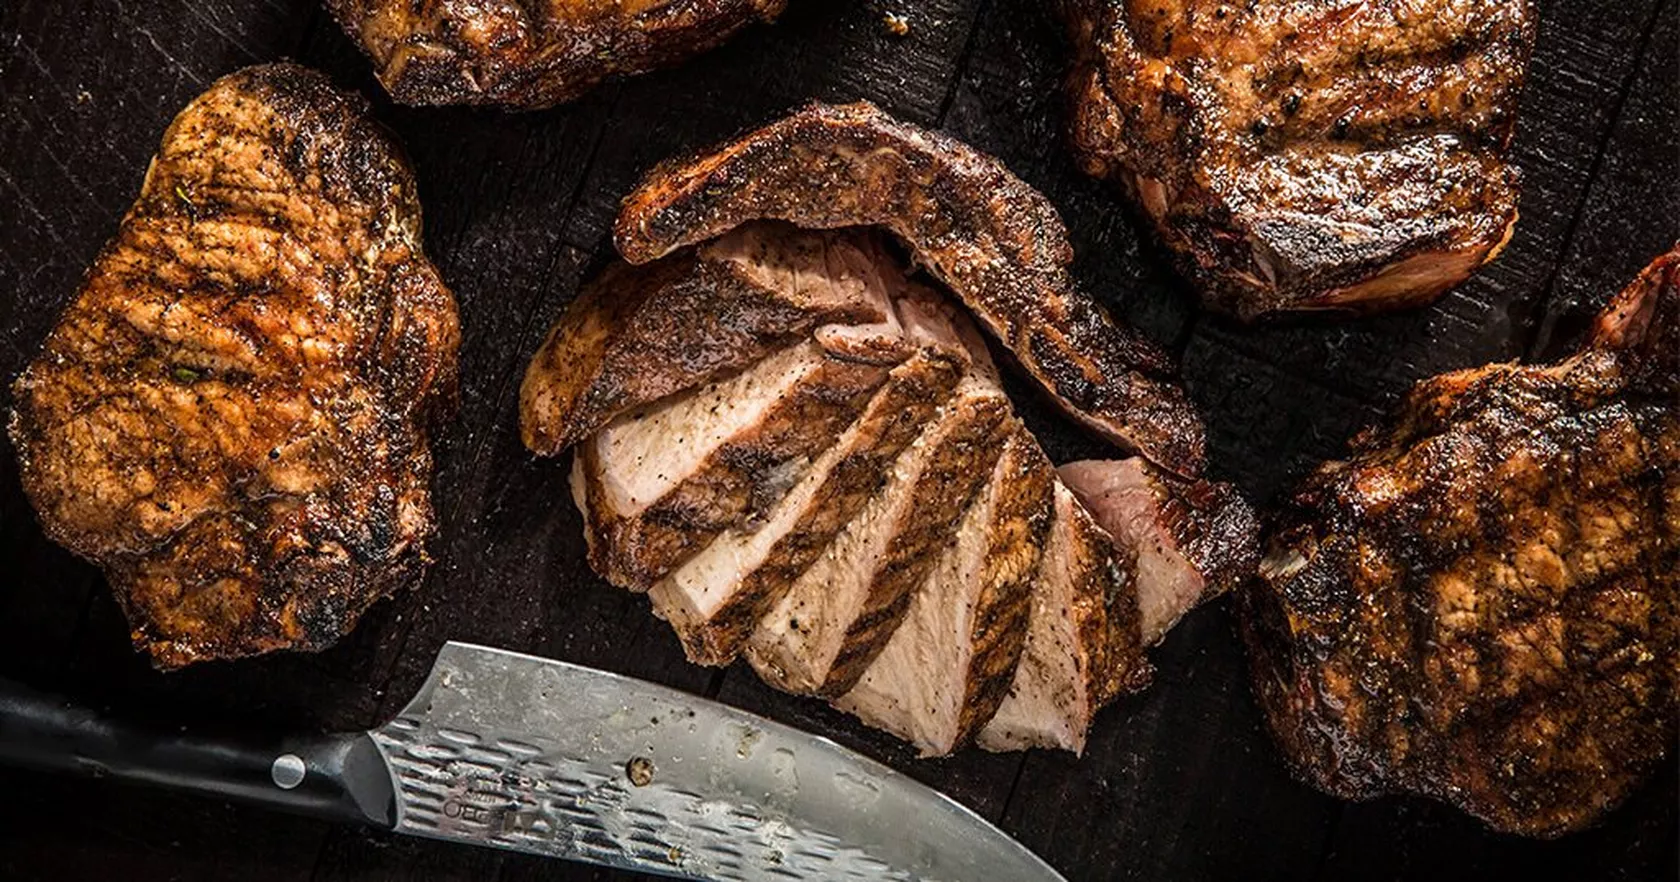 thick-cut-pork-chops-traeger-wood-fired-grills-re-he-m.webp